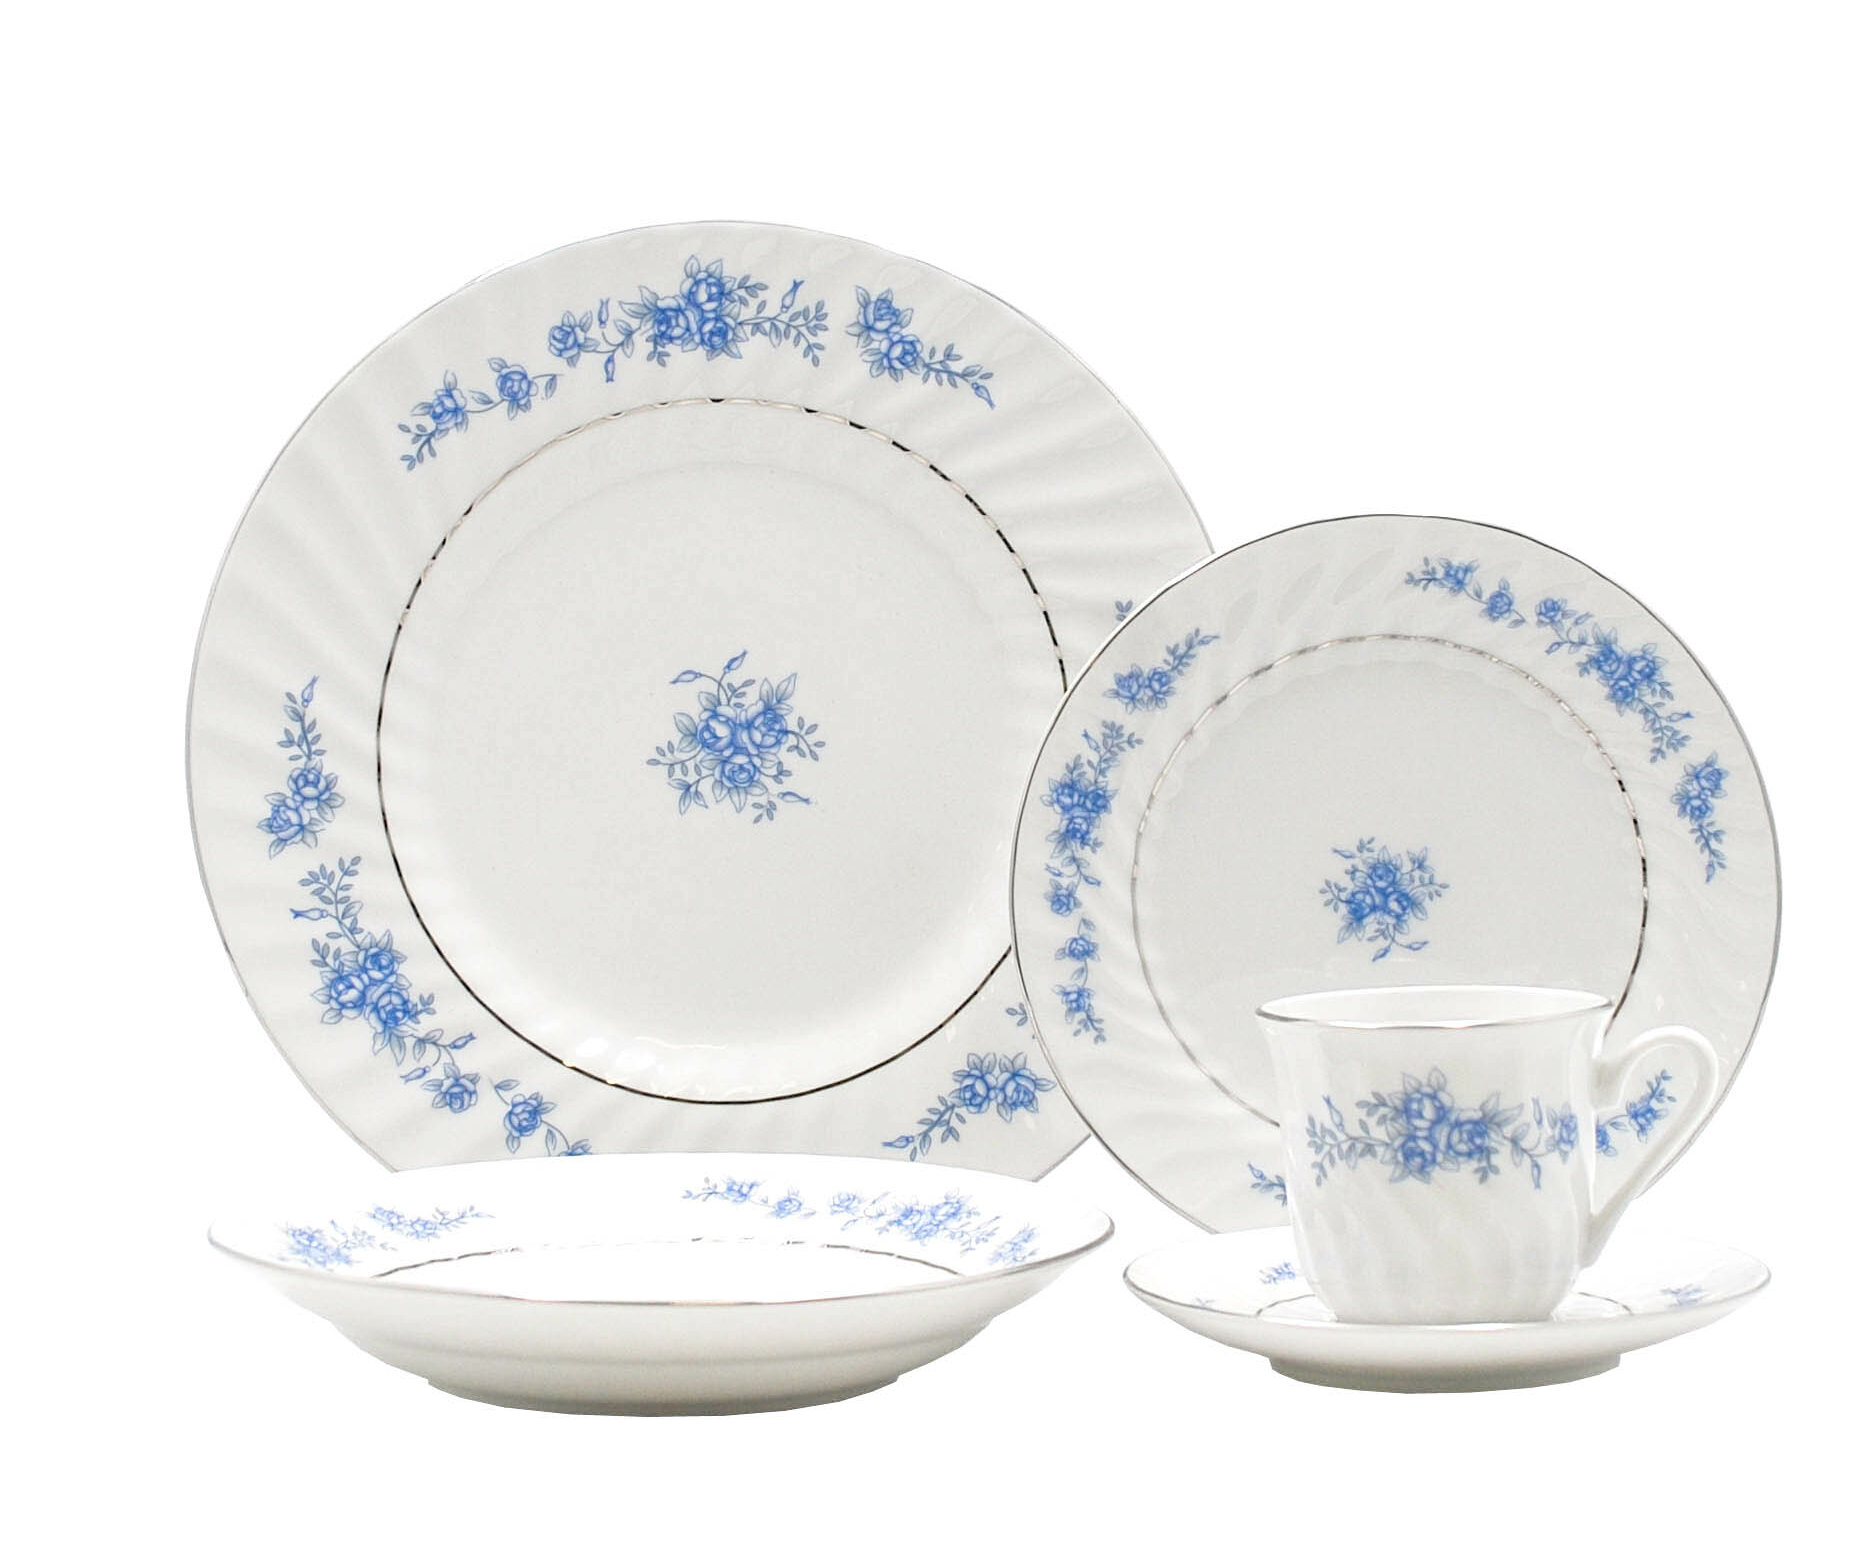 Wayfair, Oven Safe Plates & Saucers, From $30 Until 11/20